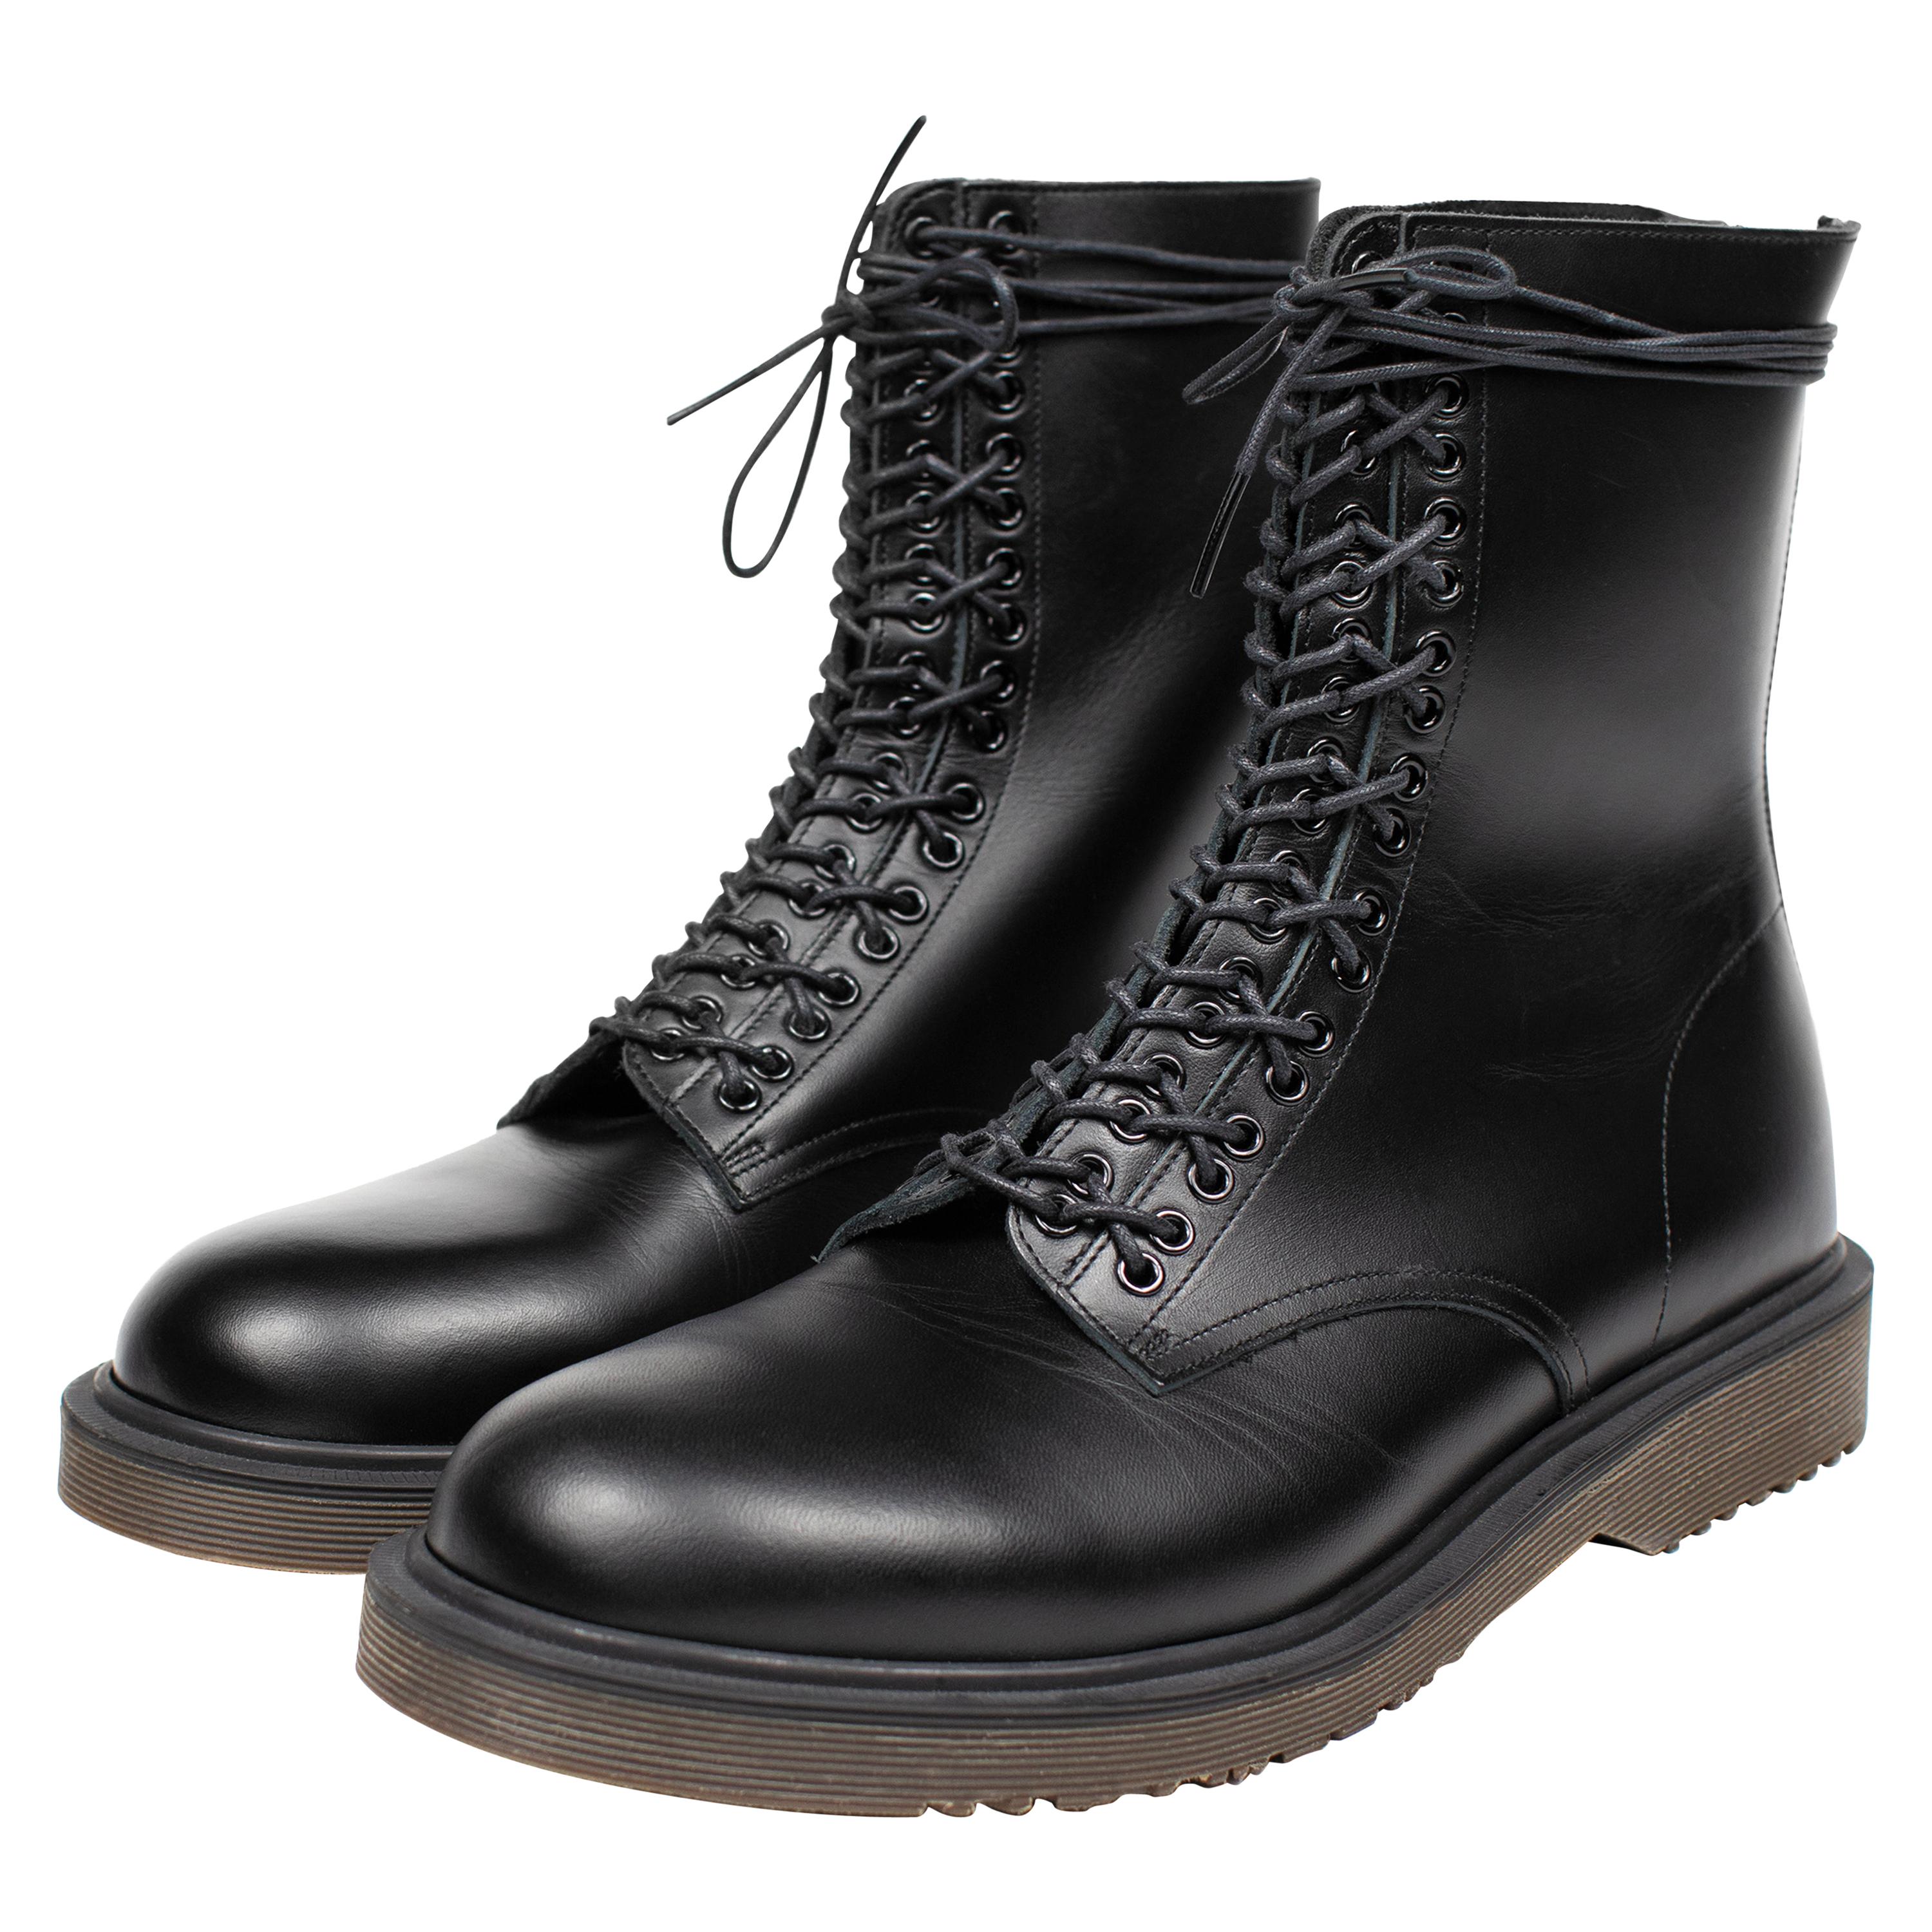 Undercover SS2014 GODOG Combat Boots